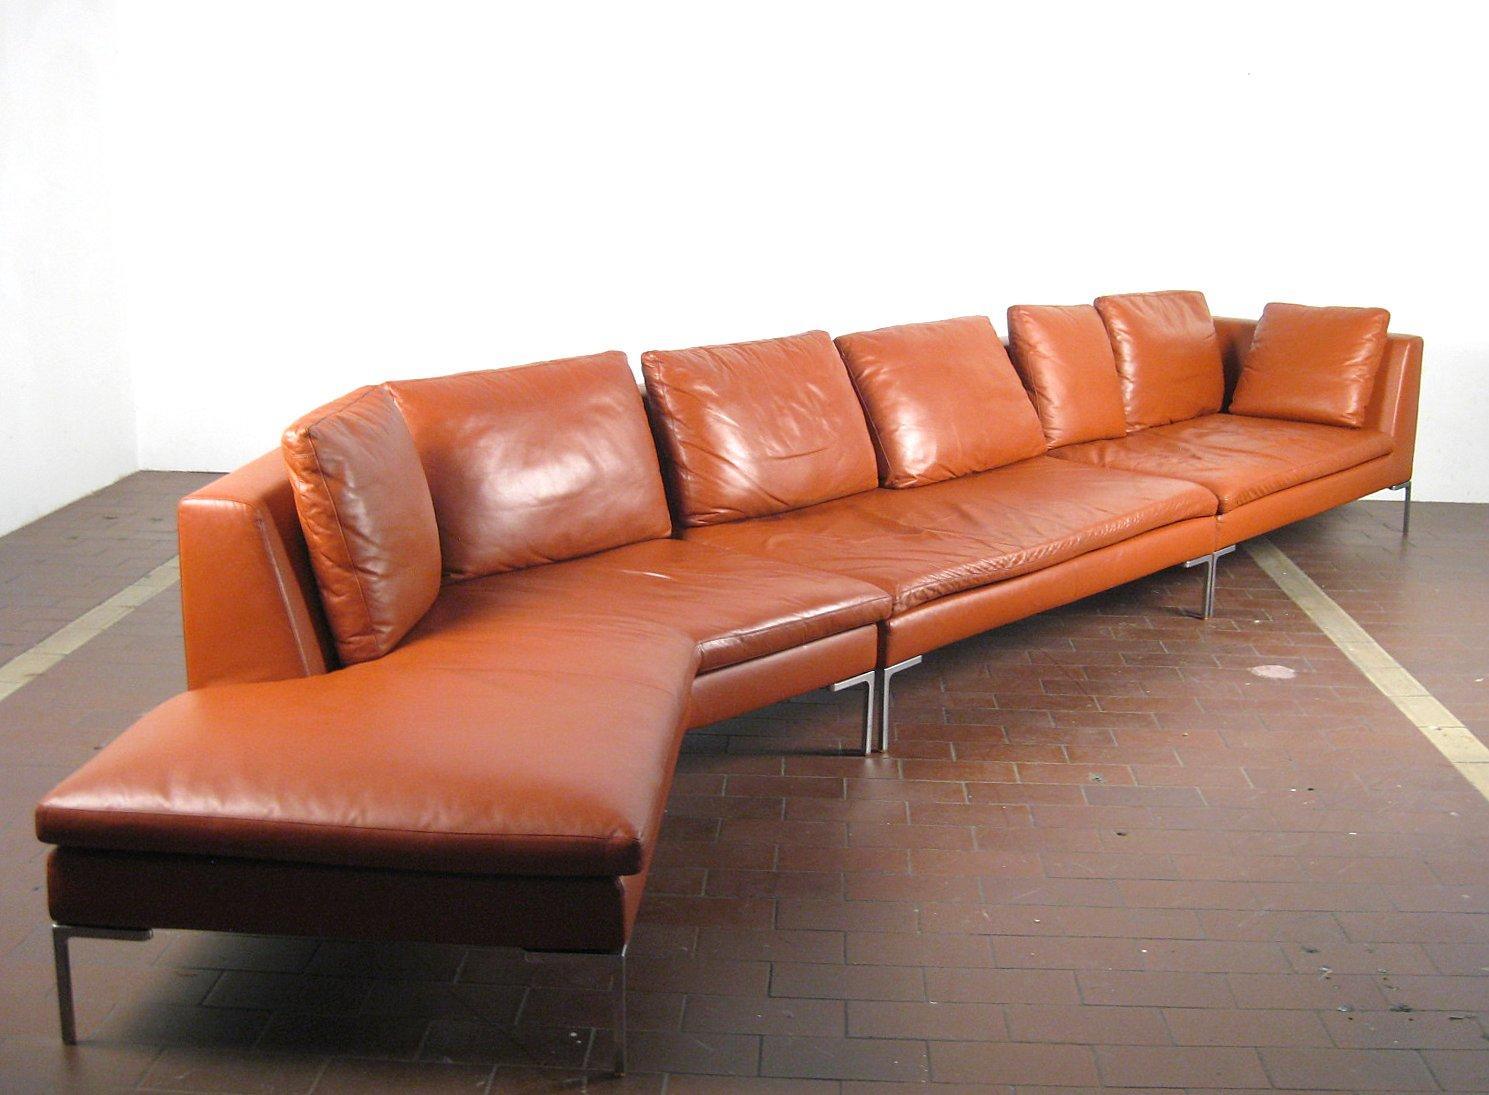 A large L shaped B&B Italia modular sofa, upholstered in soft tan leather, with polished aluminum feet. The sofa can be configured into different shapes to suit the room and your mood.
The leather is soft and supple, almost-new in condition with no